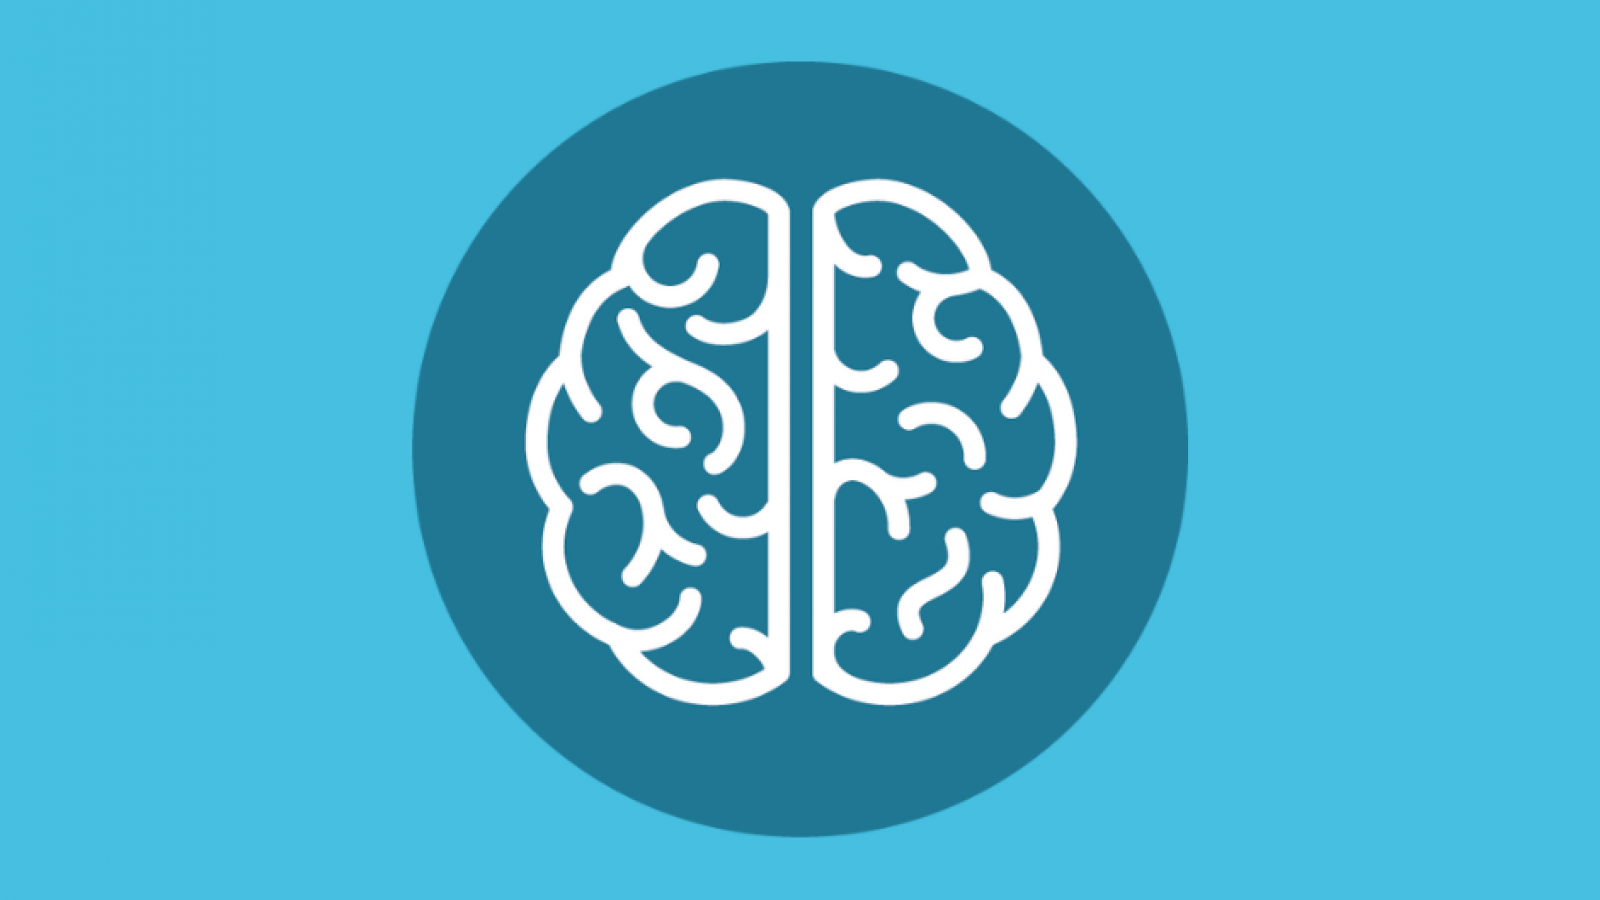 Icon of a brain in a teal blue circle